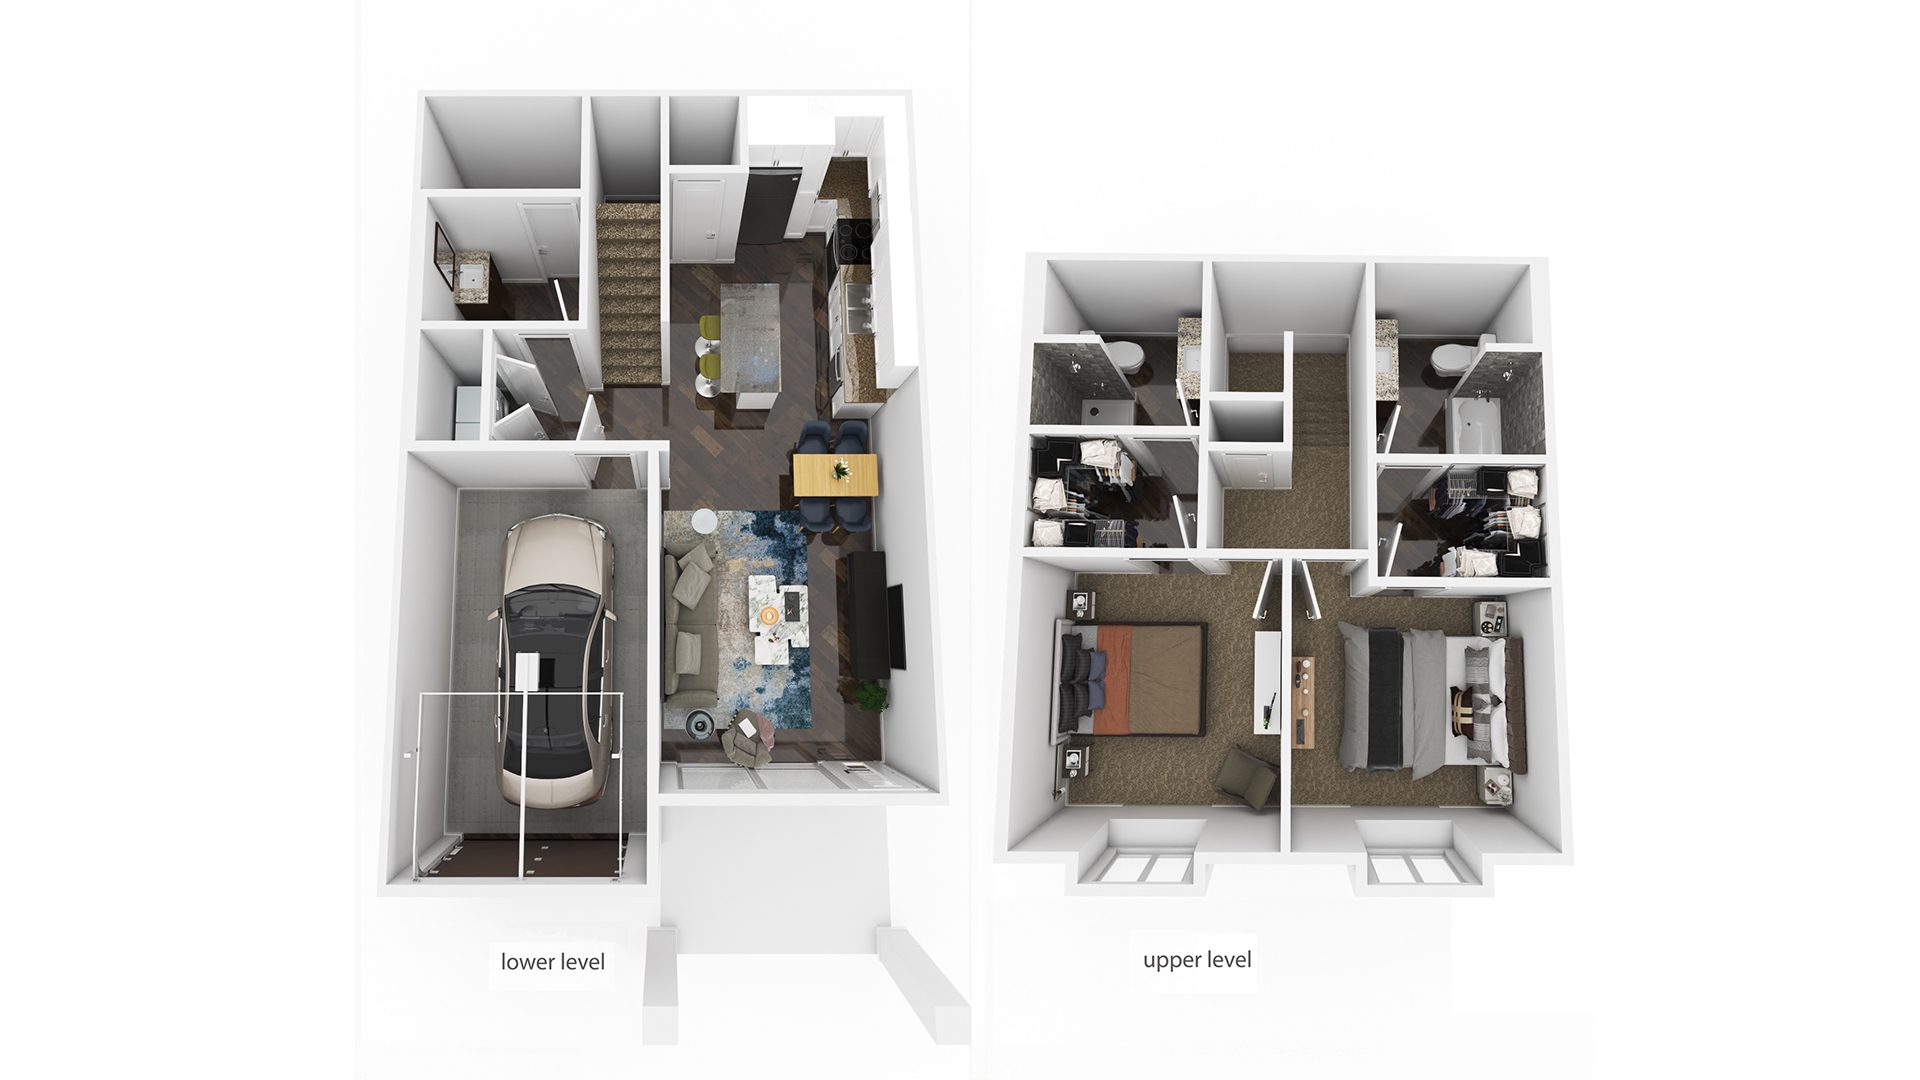 Townhome C